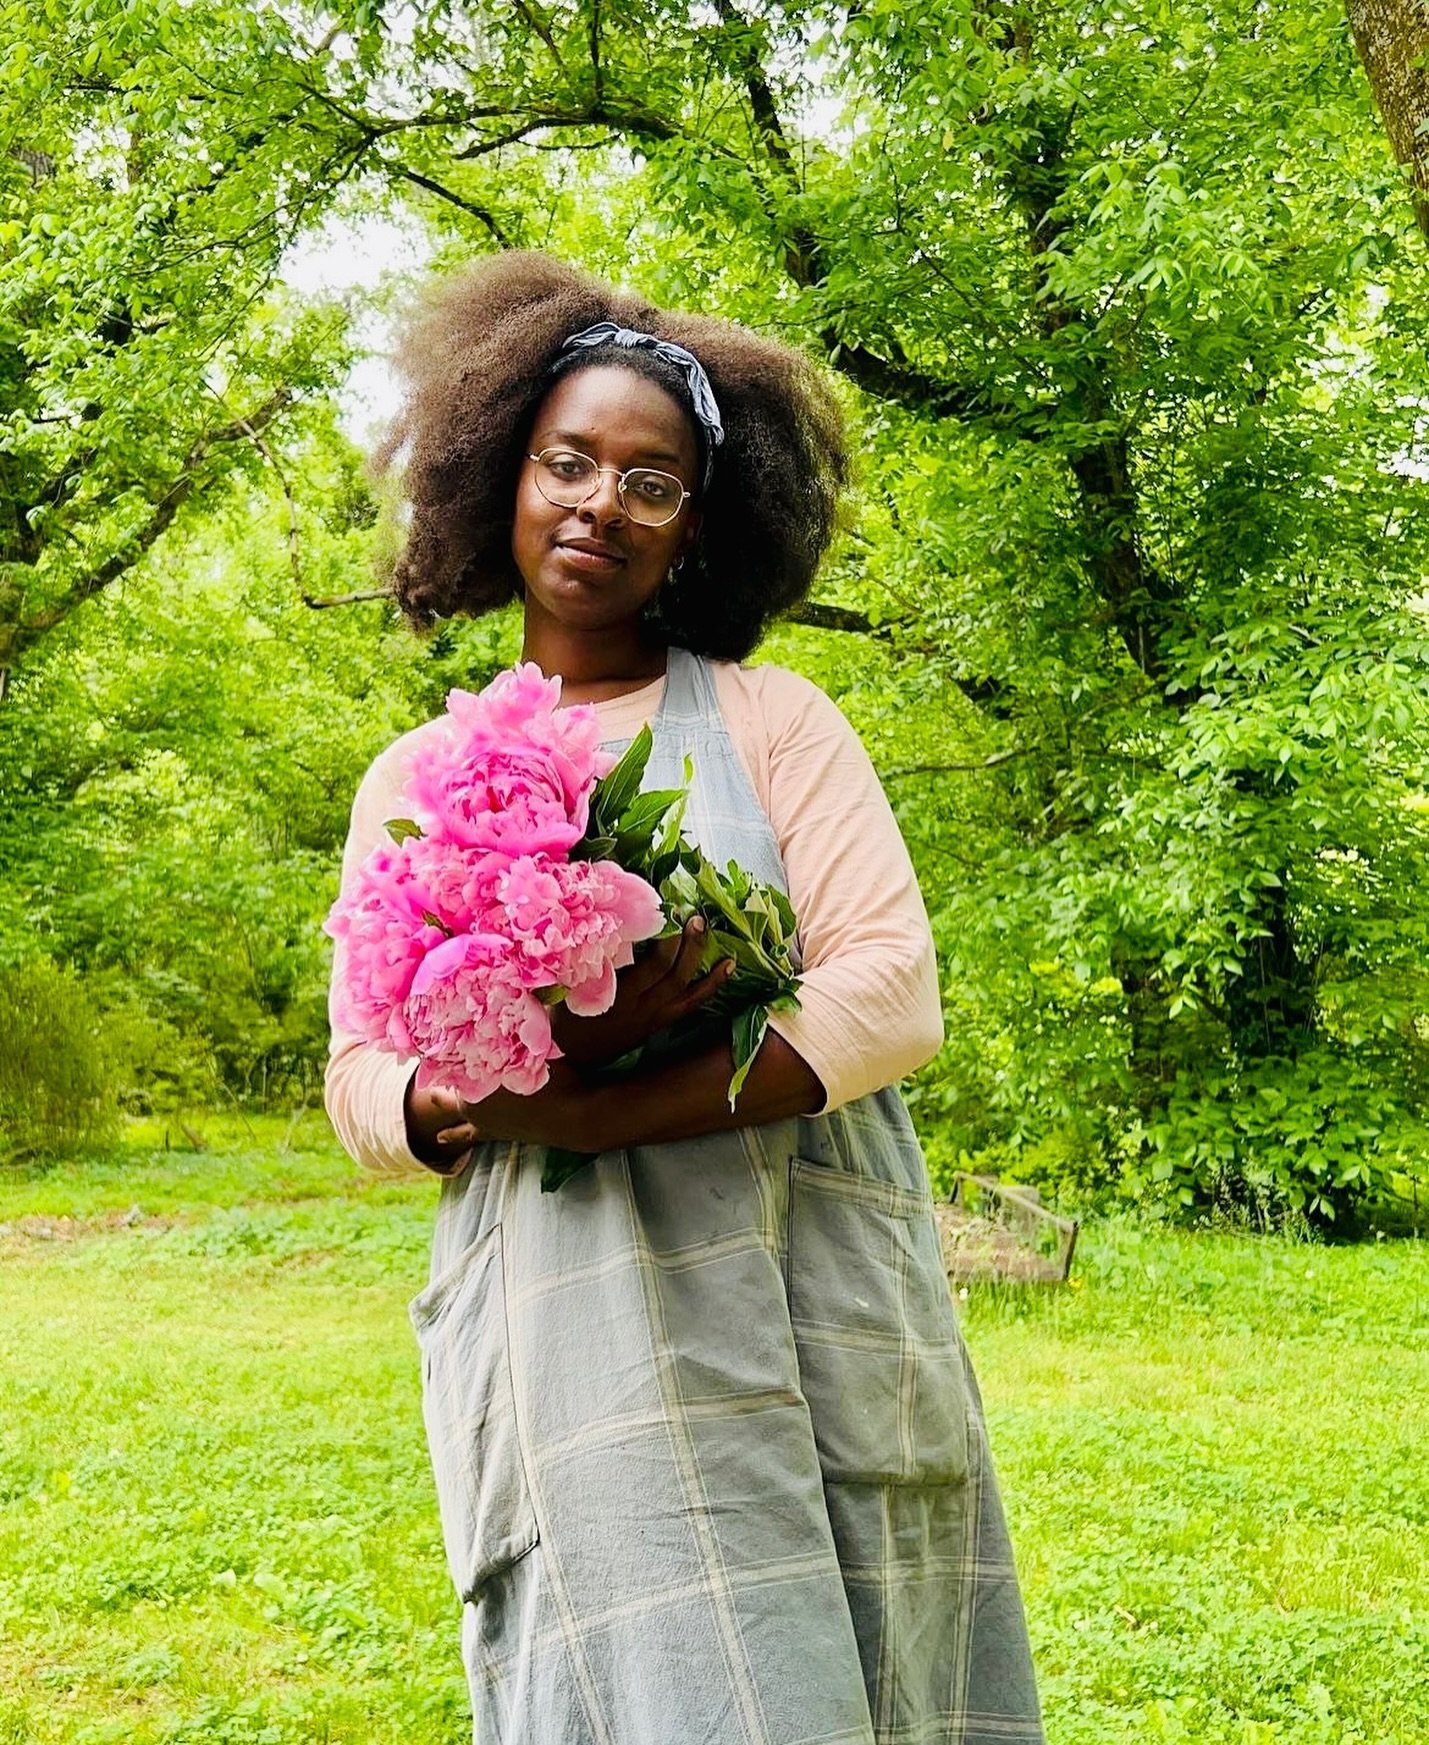 Meet Nailah Marie 👋🏾 Sis is a #BlackGirlFloristFarmer and a beautiful artist. Along with her love of farming flowers, she is a classically trained chef 👩🏾&zwj;🍳🥗

[Sis, let Nailah Marie know in the comments what other skills and talents you hav